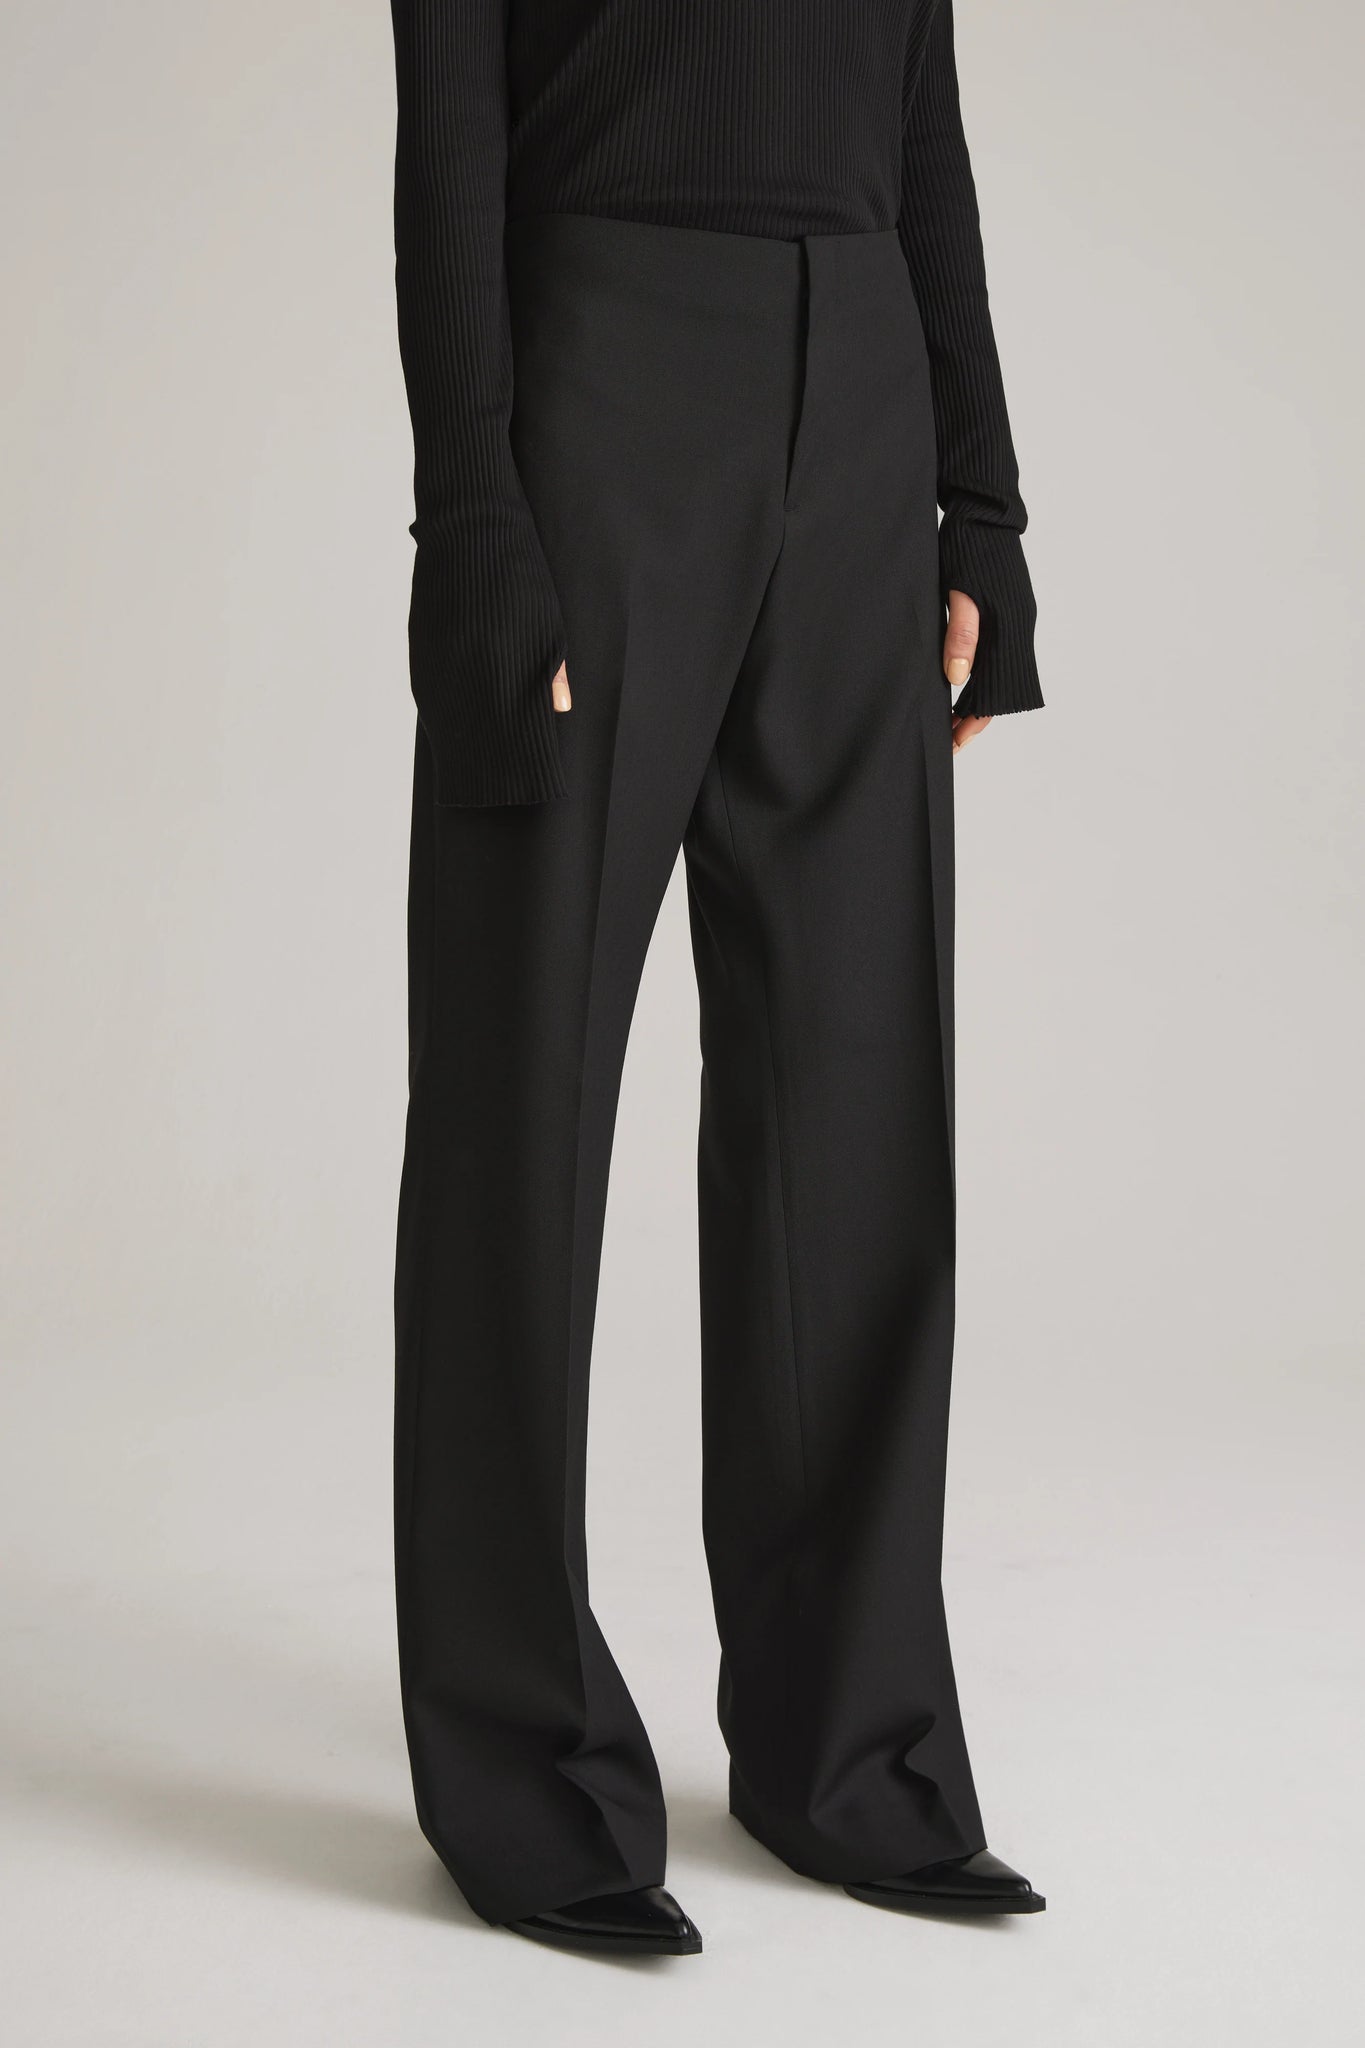 Aspect trousers by Hope - black tailored wool